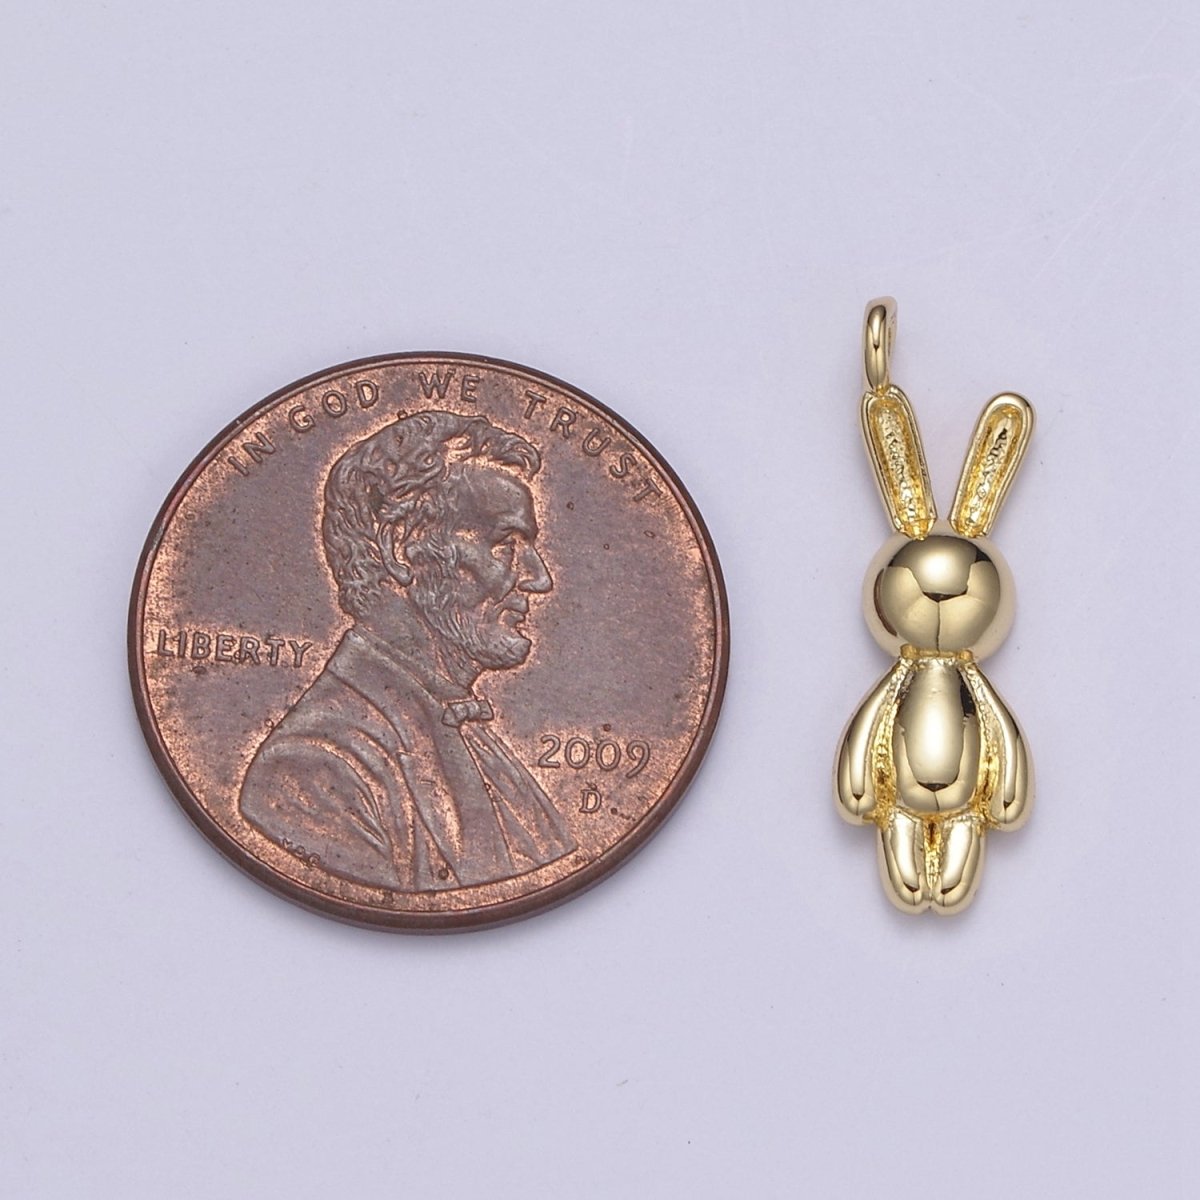 Gold Filled small balloon rabbit Charm Tiny bunny pendant for Kids Jewelry Necklace Bracelet Earring Supply N-664 N-665 - DLUXCA